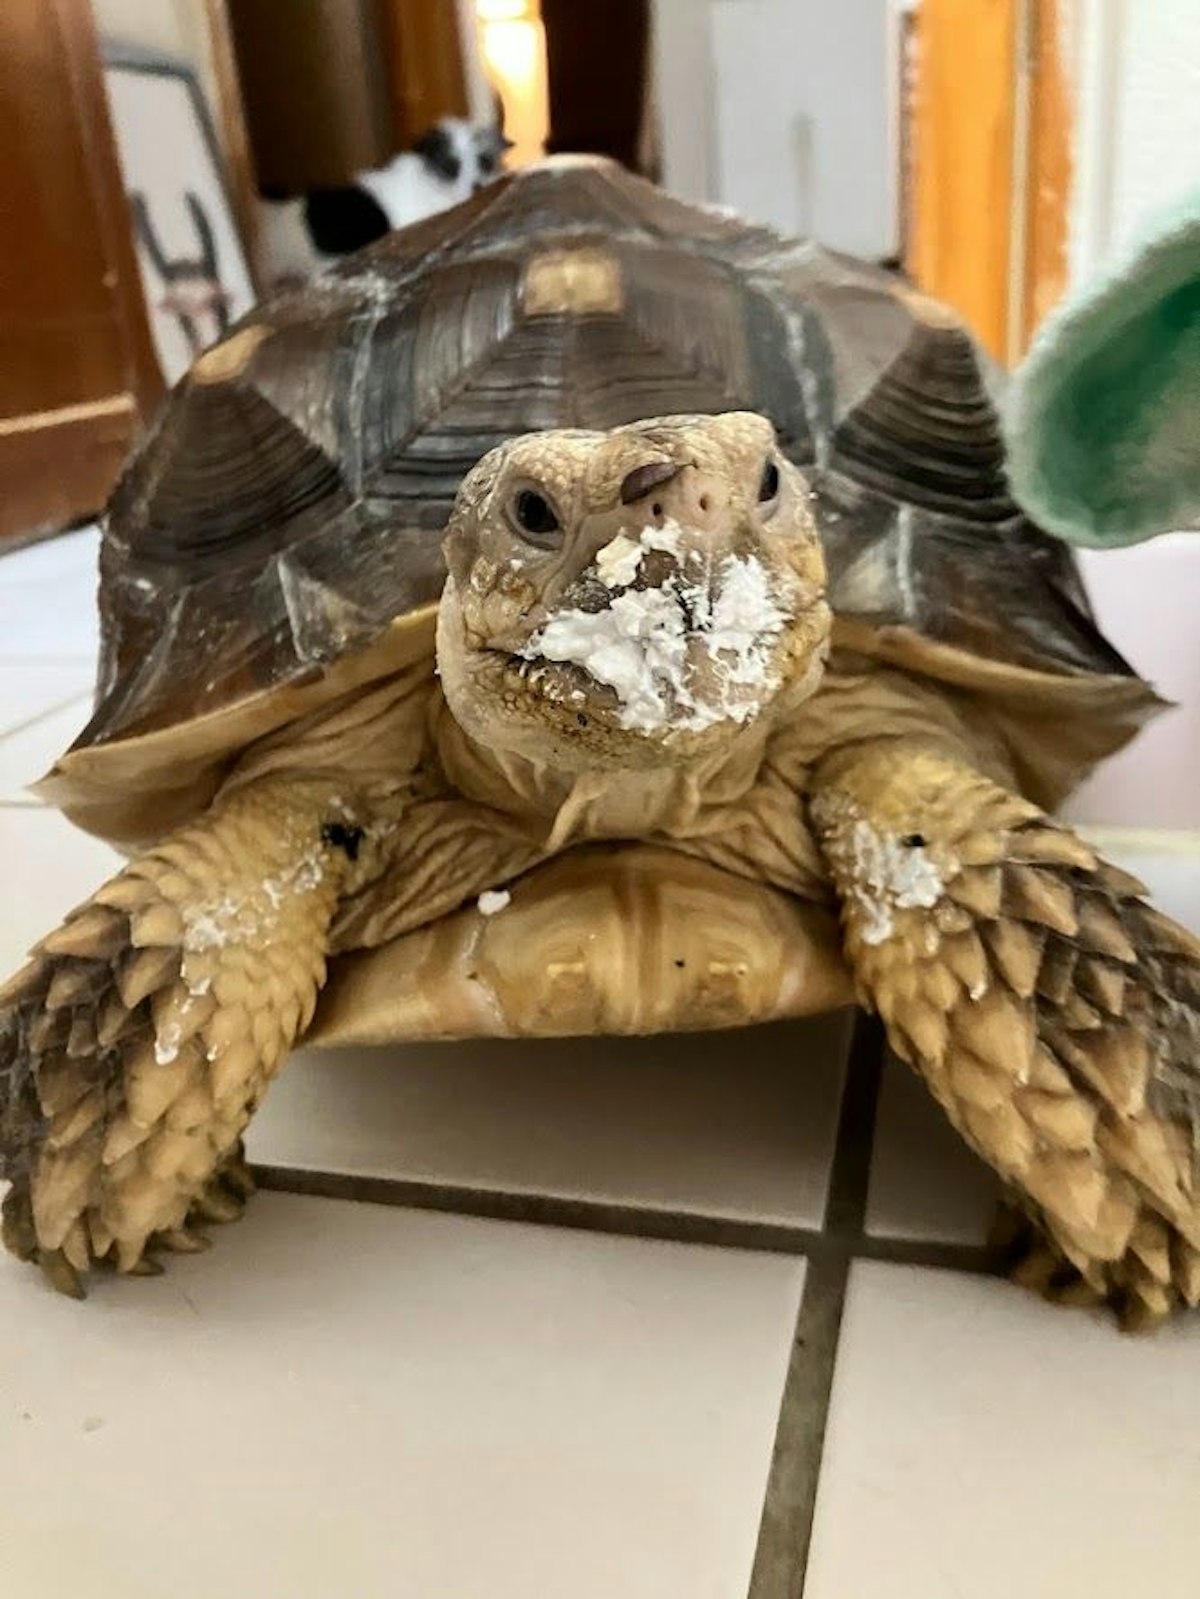 featured image - What Its Like for Me, Sisu the Tortoise, to Live With a Human Who Is Learning Tech